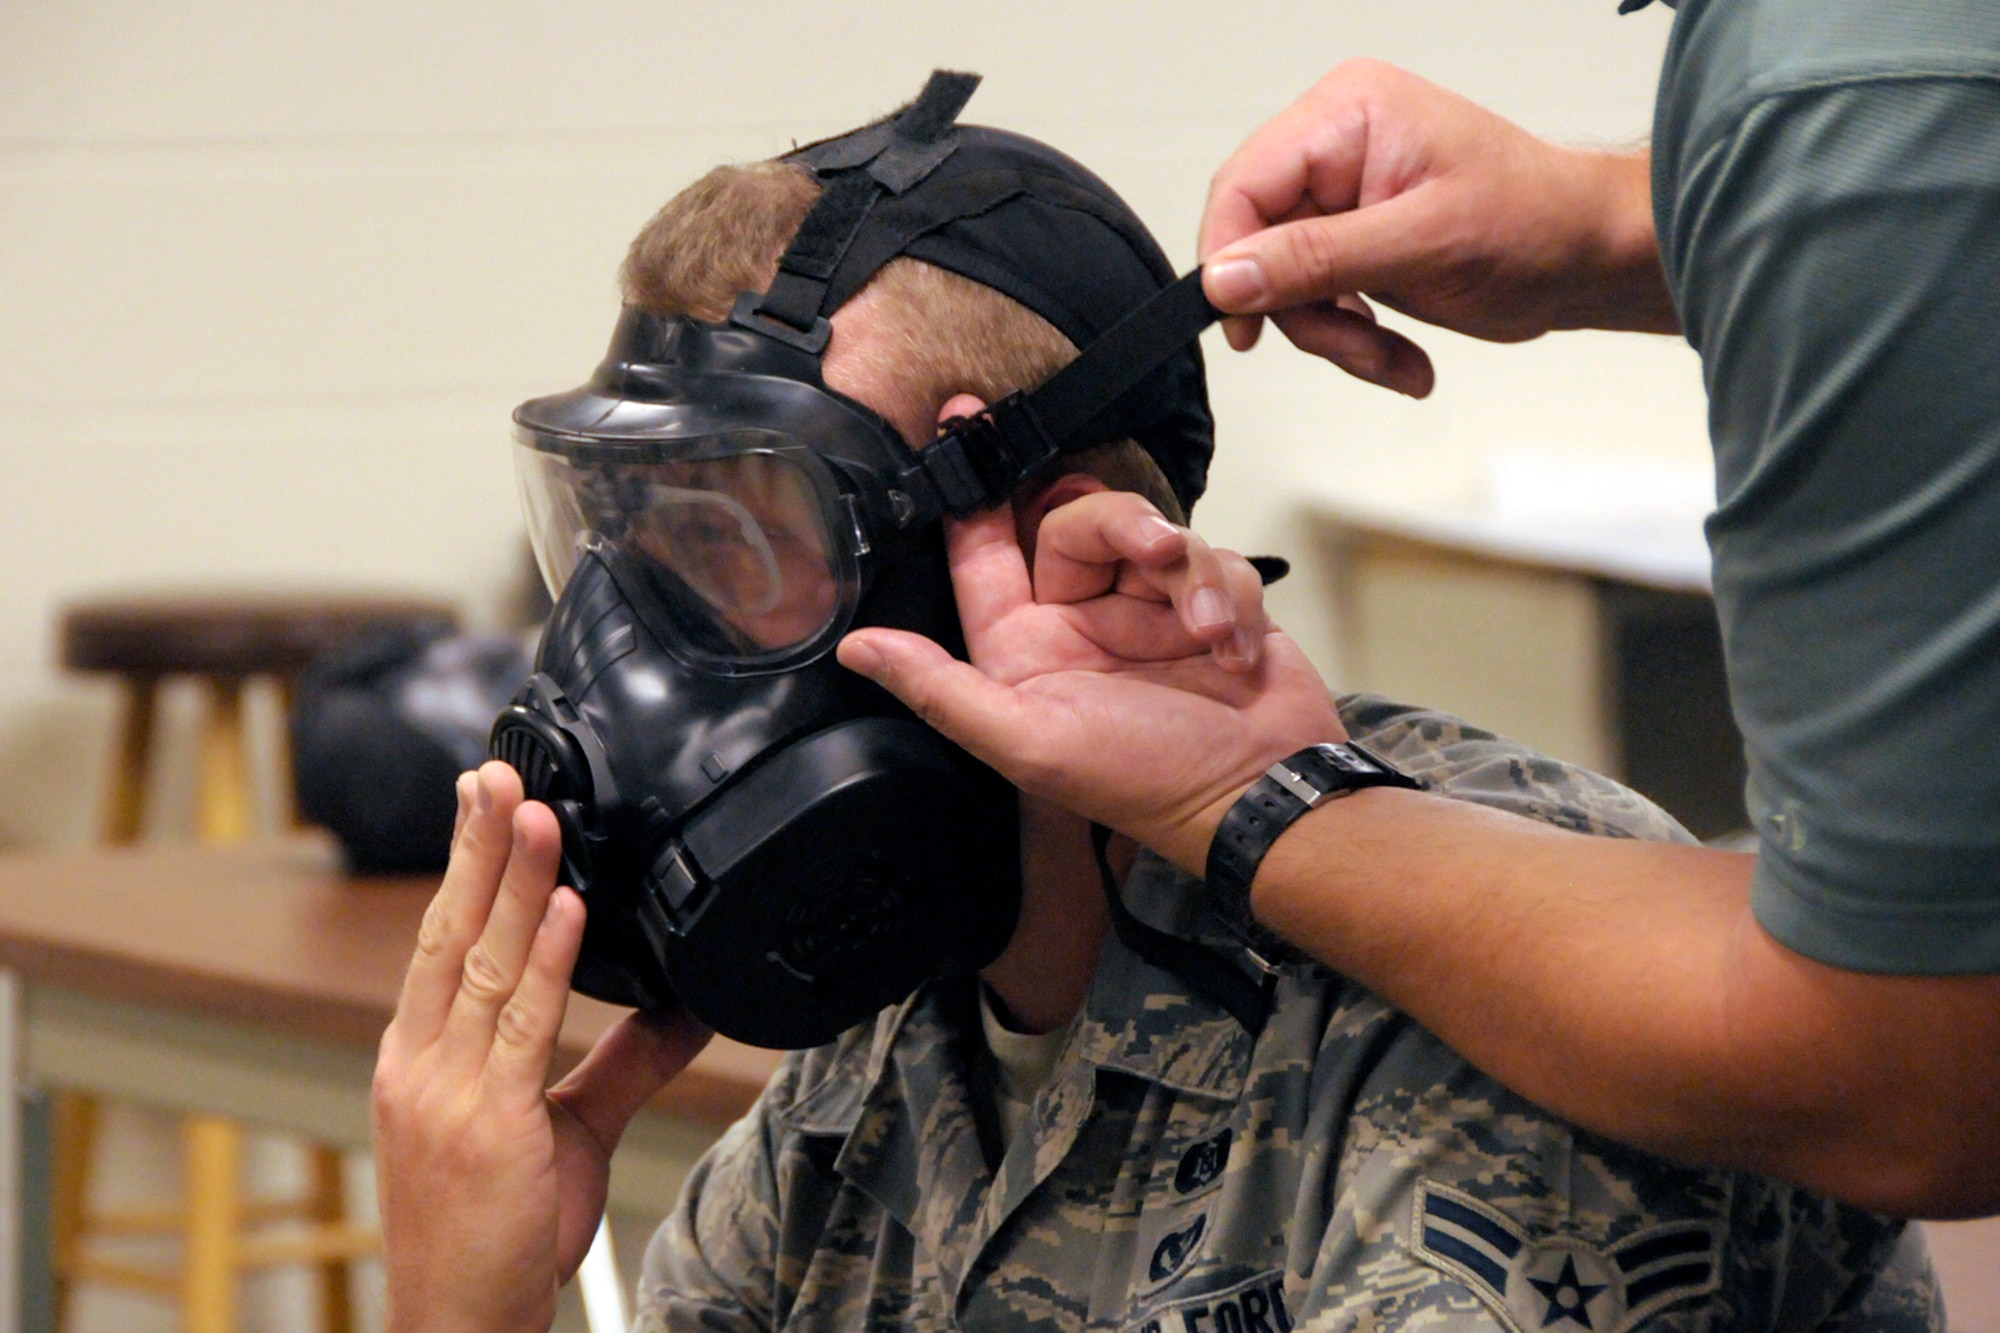 An instructor checks the fit of a new M-50 Joint Service General Purpose Mask on an Airman during a training session at Selfridge Air National Guard Base, Mich., Aug. 8, 2012. The mask is being issued to all Air Force personnel, replacing an early version gas mask. The new mask improves air flow and visibility for the wearer. (Air National Guard photo by Brittani Baisden)